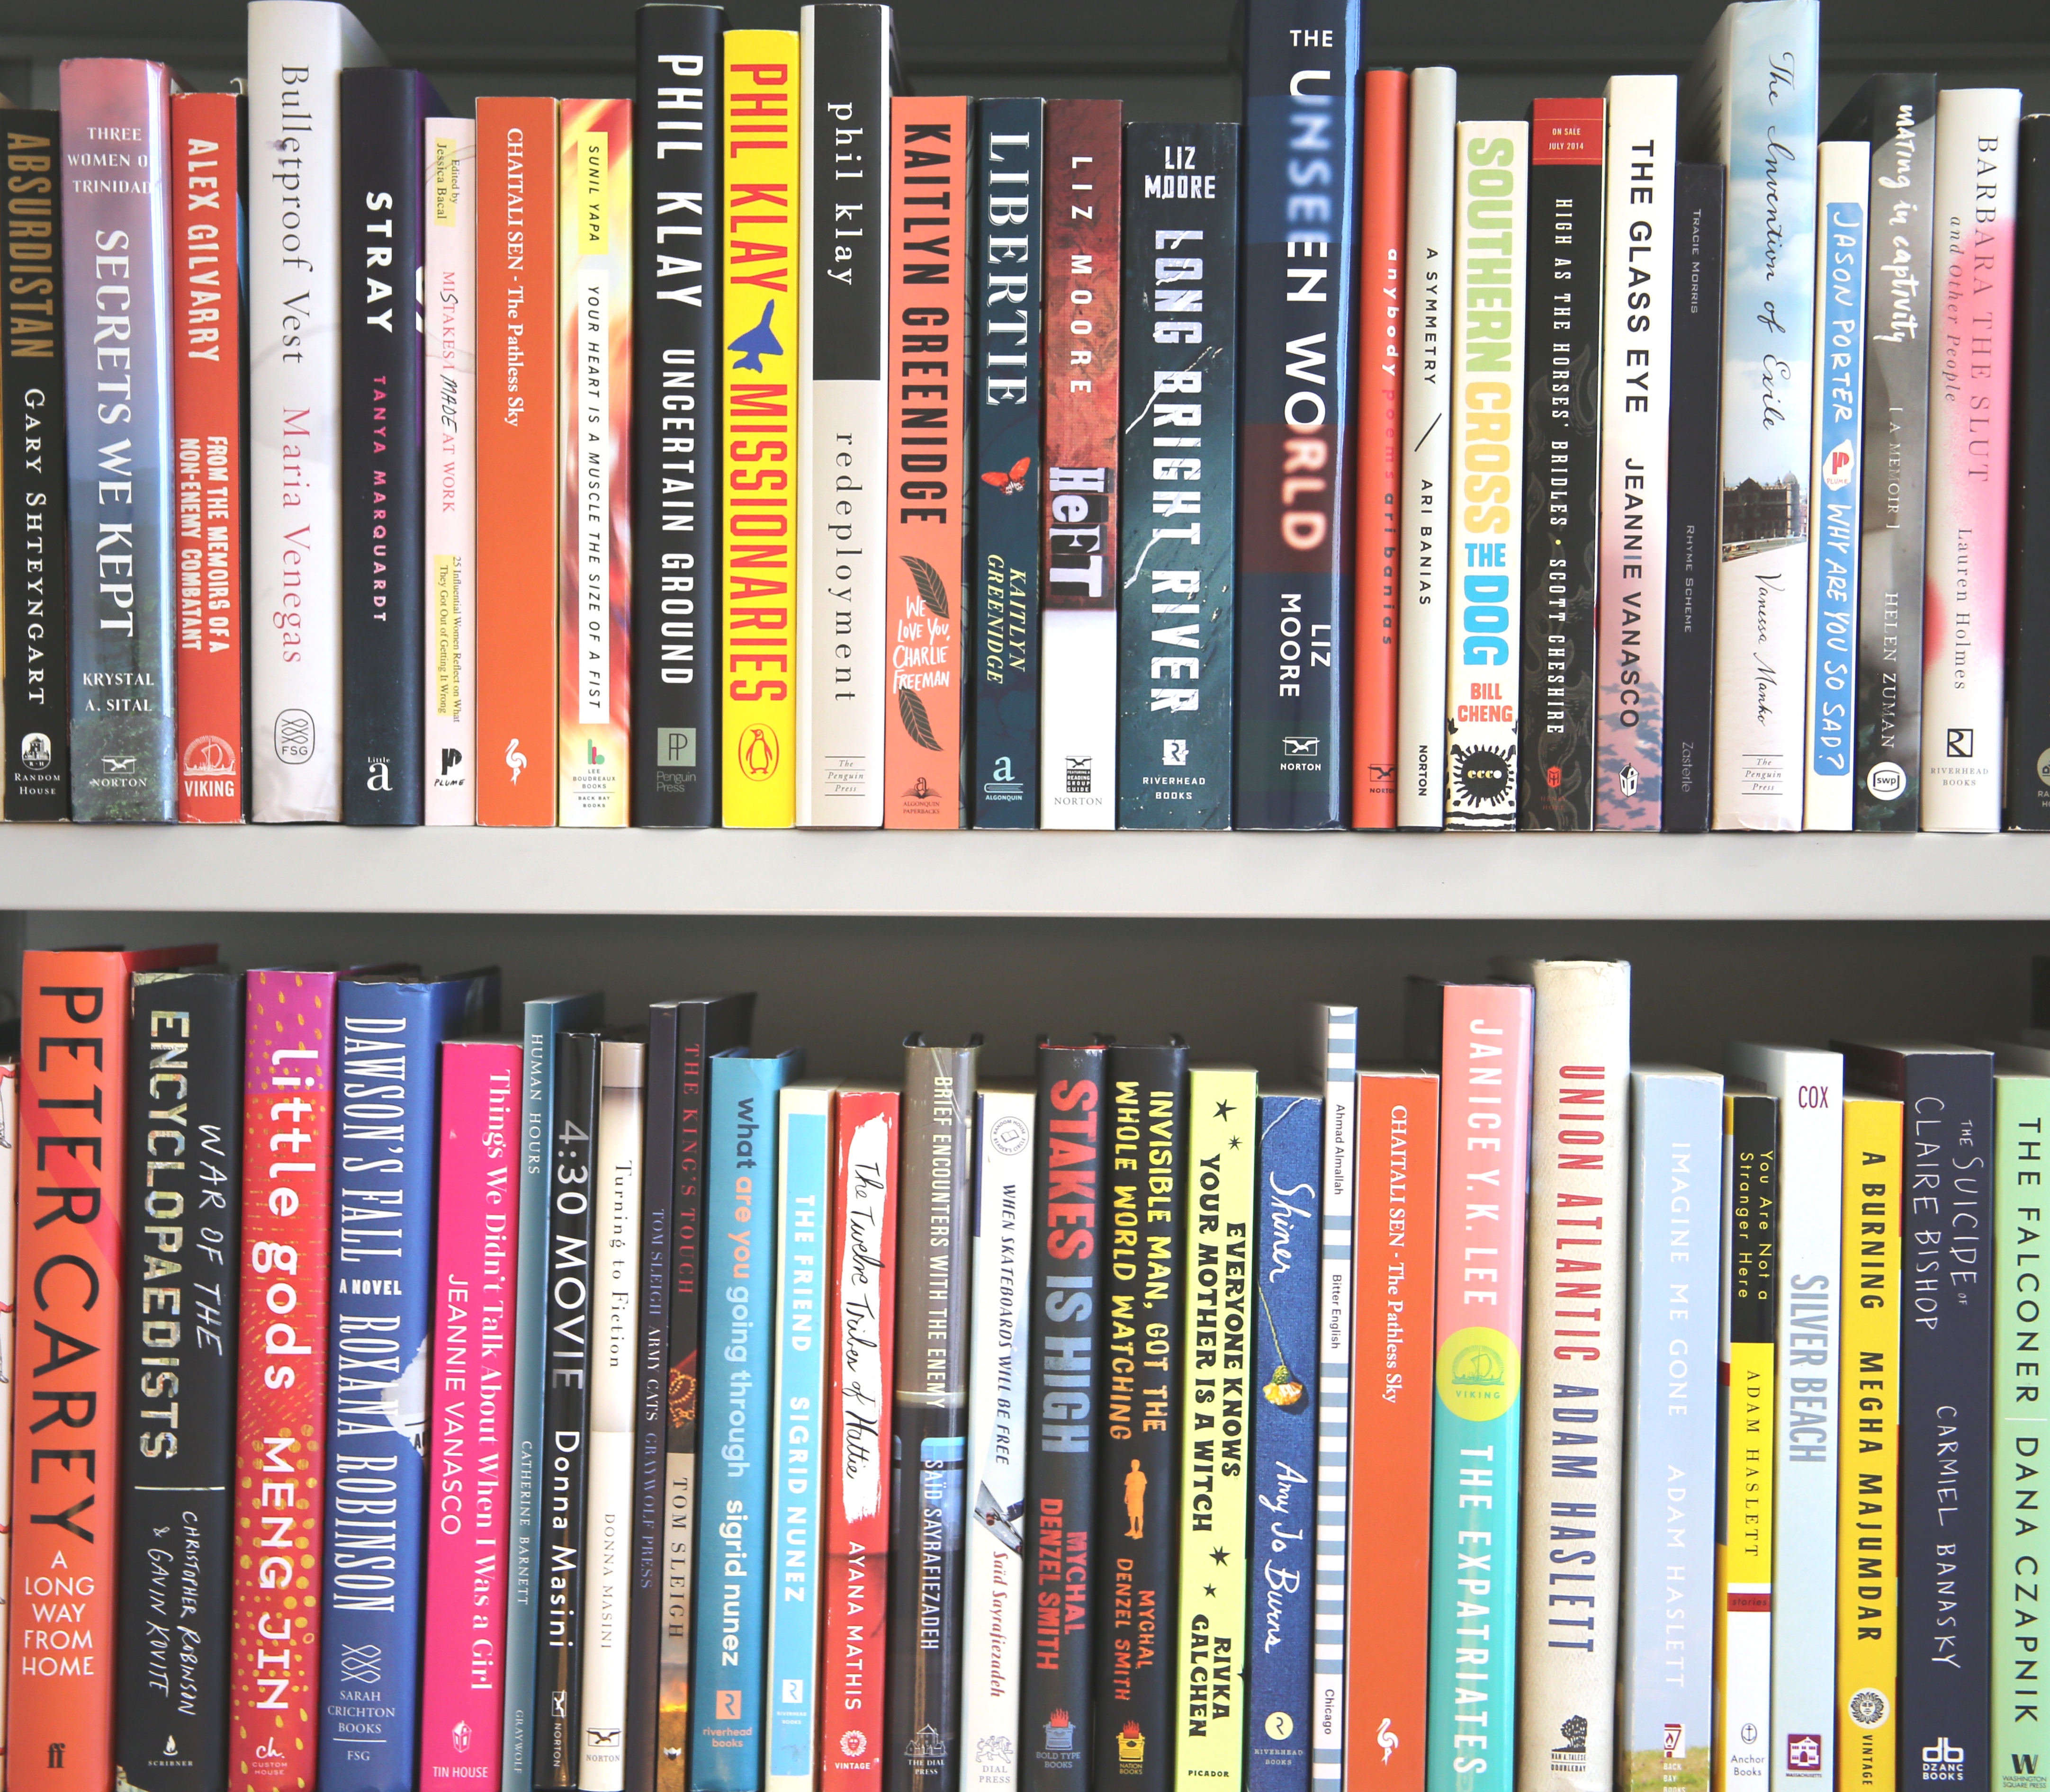 Bookshelf of books by Hunter alumni, faculty, former faculty, and friends of the MFA program